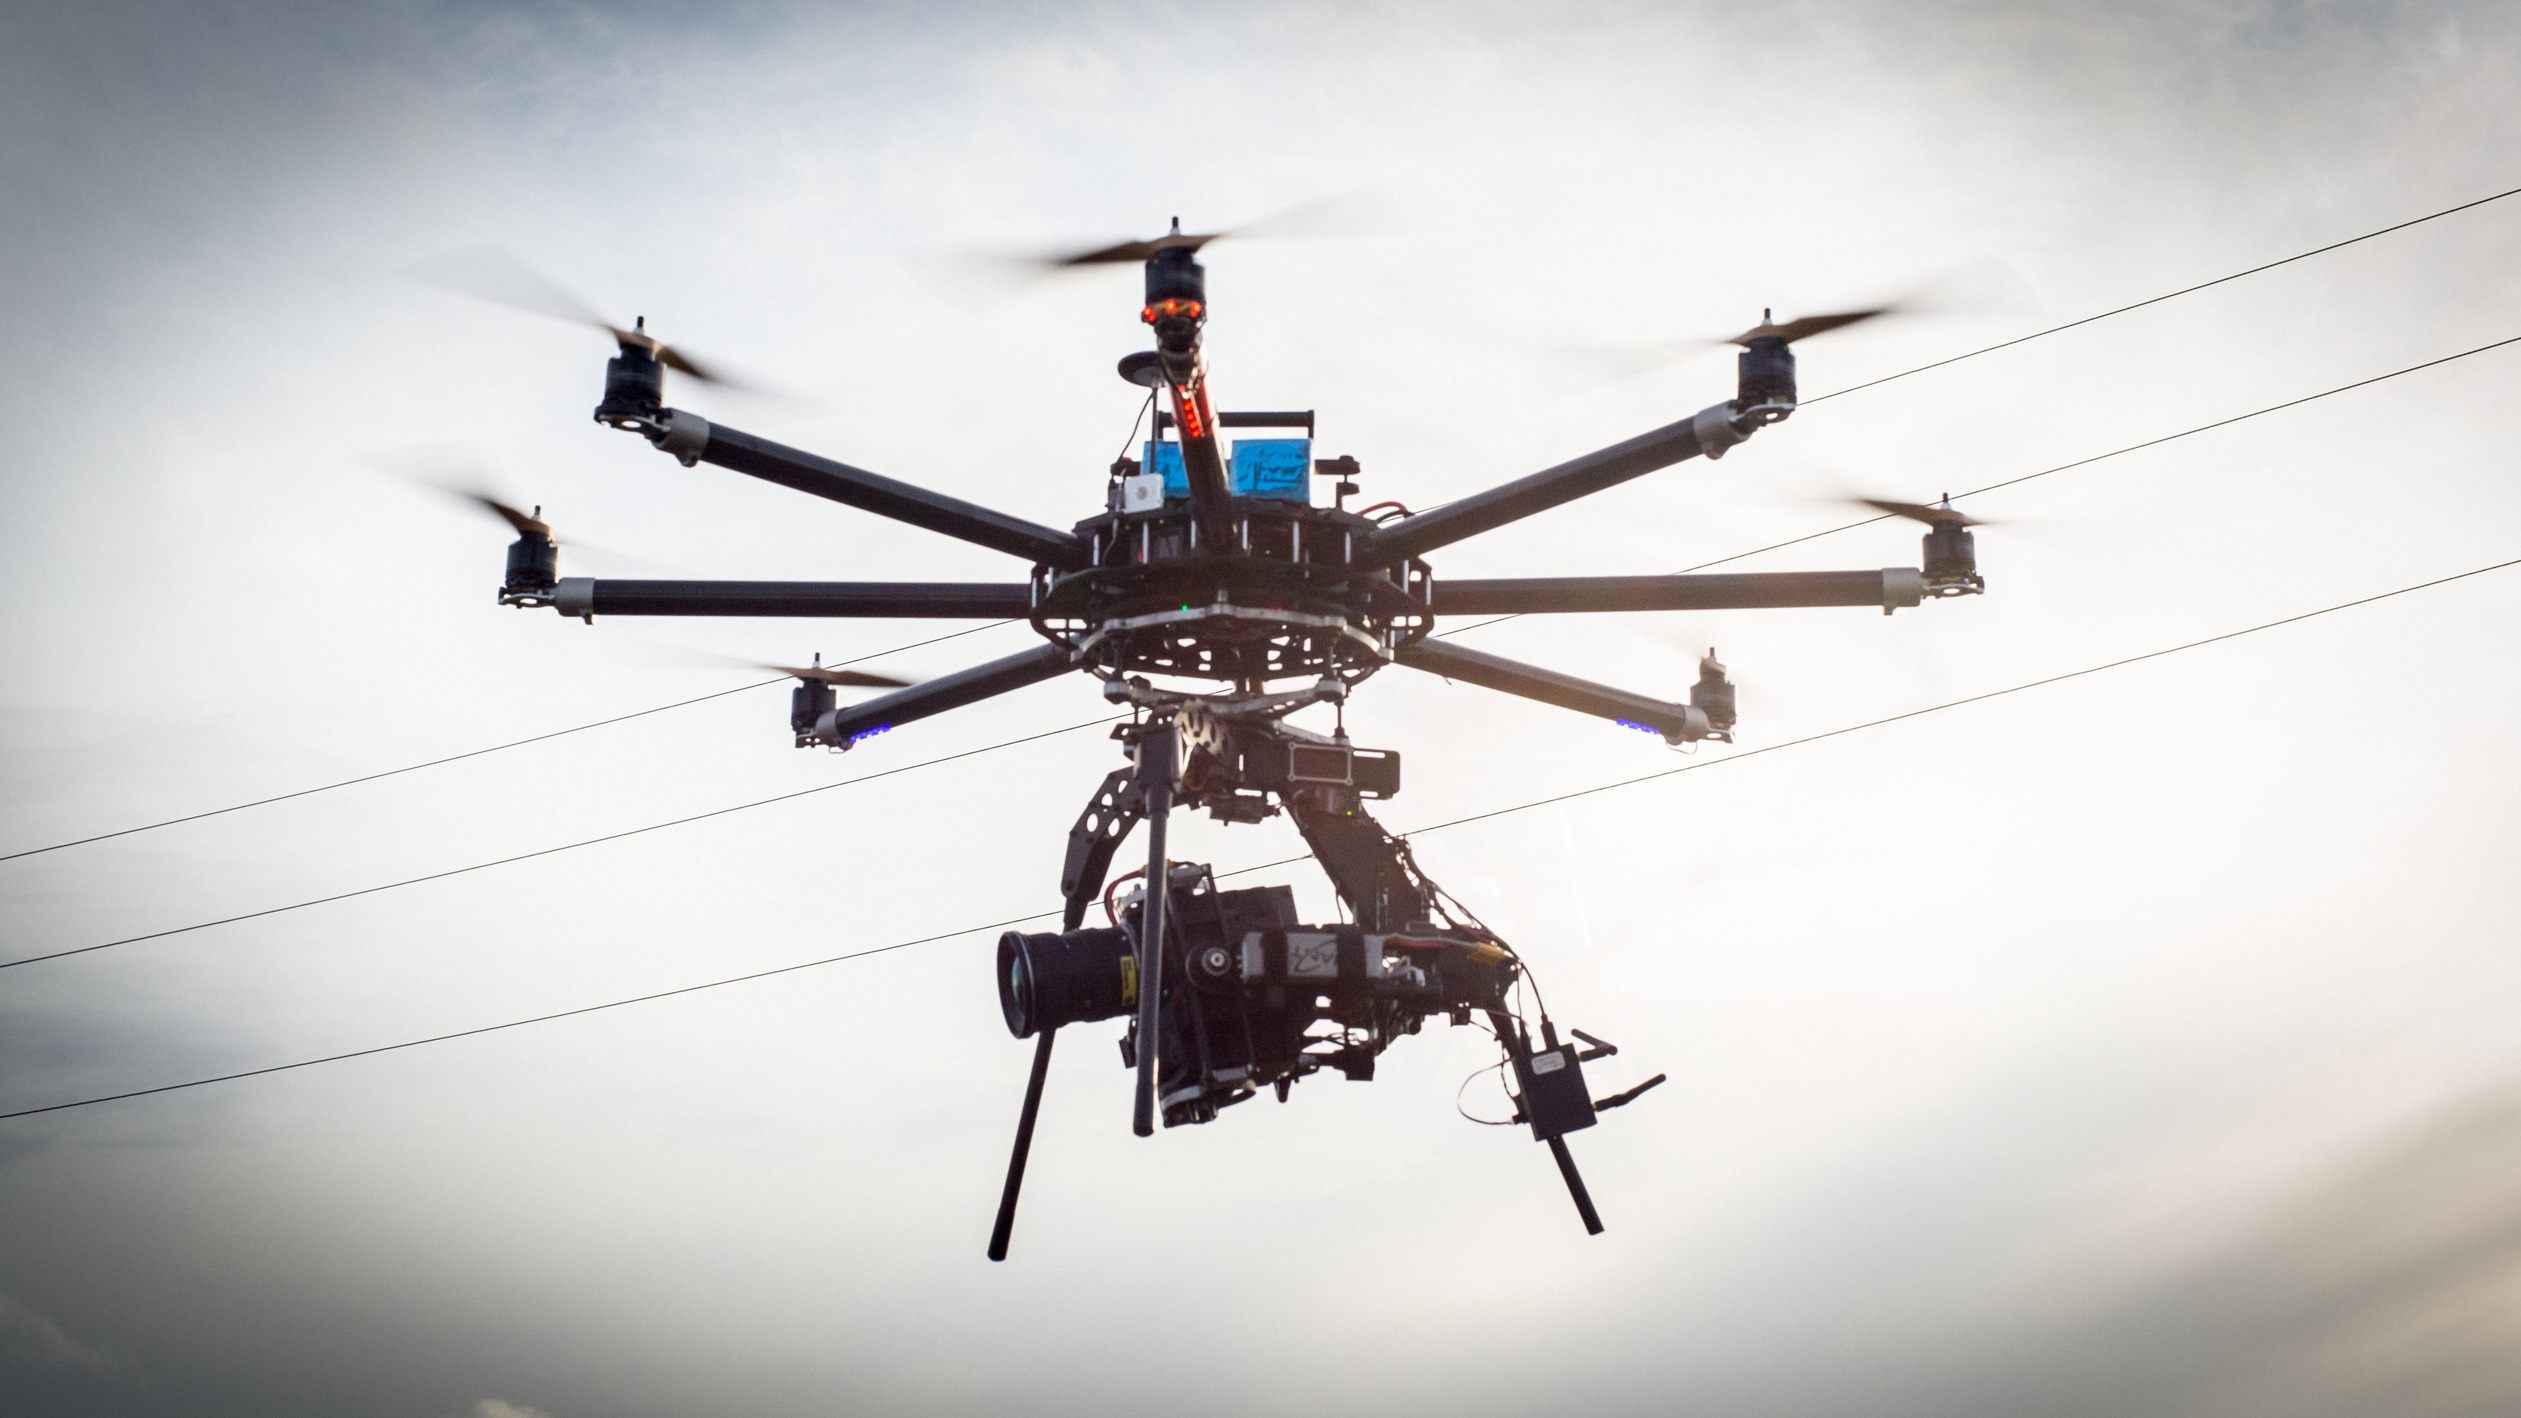 Our Helicam with Red Epic